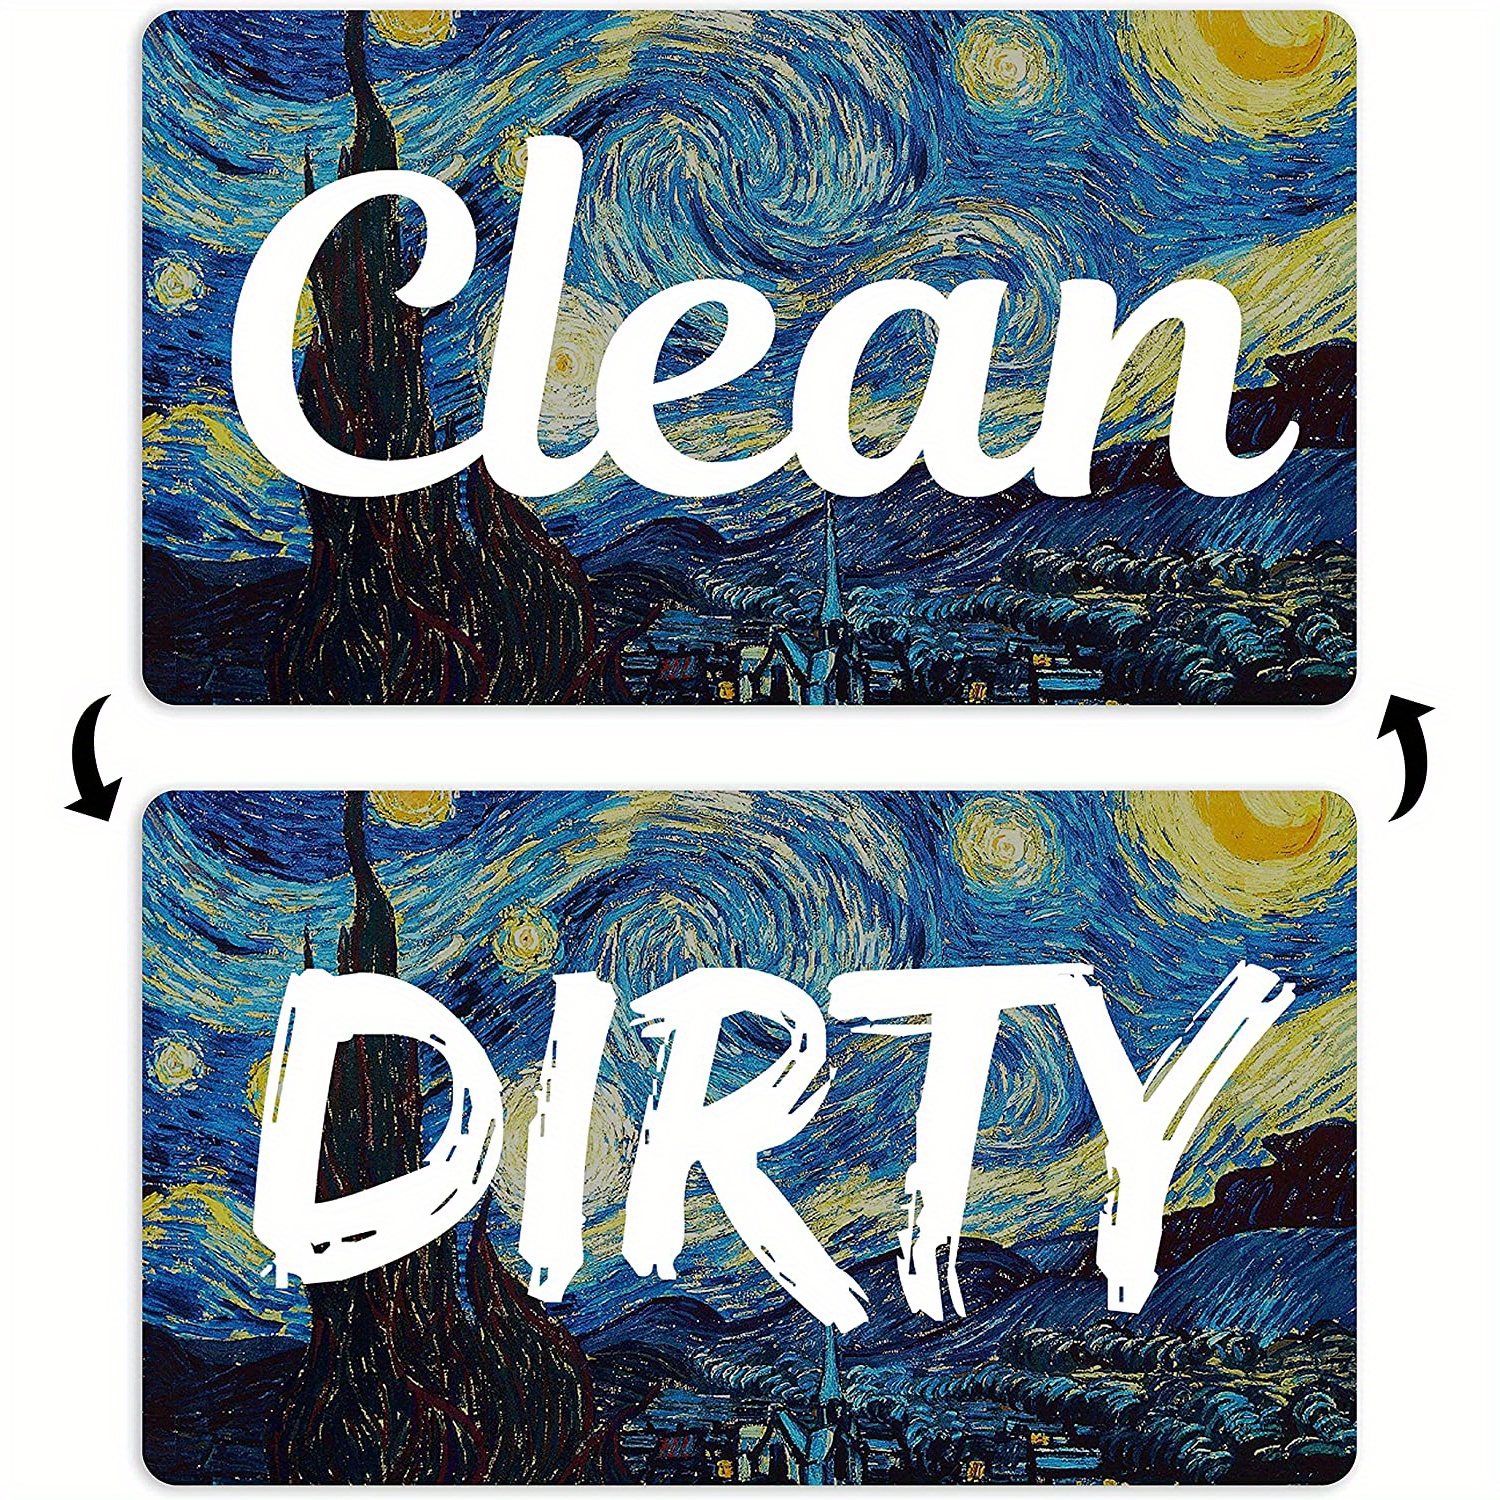 New! Dishwasher Magnet Clean Dirty Sign - Strongest Magnet Double Sided Flip - with Bonus Metal Magnetic Plate - Universal Kitchen Dish Washer